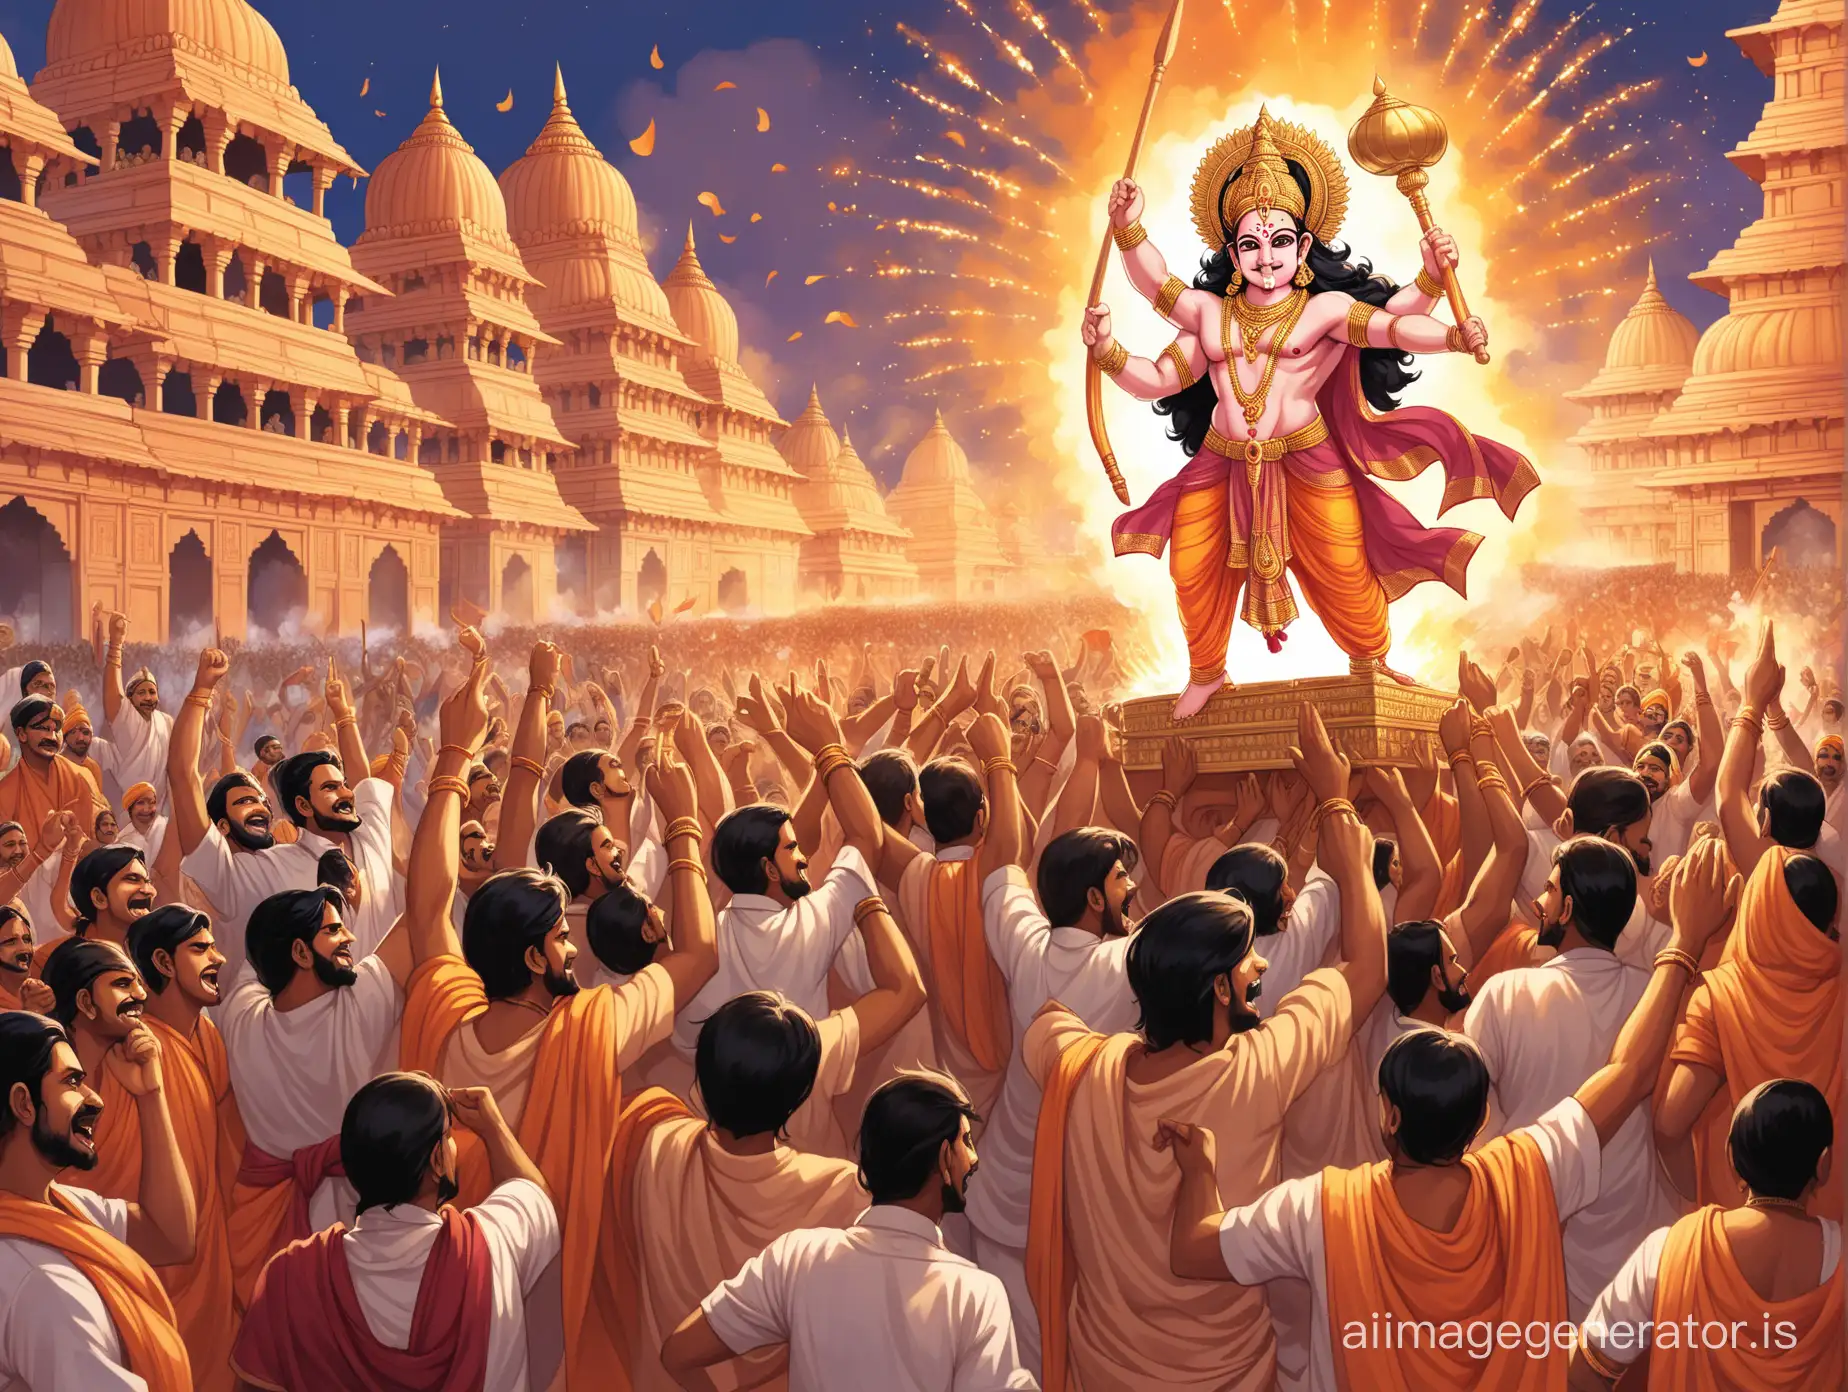 Illustrate Lord Ram's triumphant return to Ayodhya after defeating Ravana, capturing the joyous atmosphere and celebrations among the citizens.